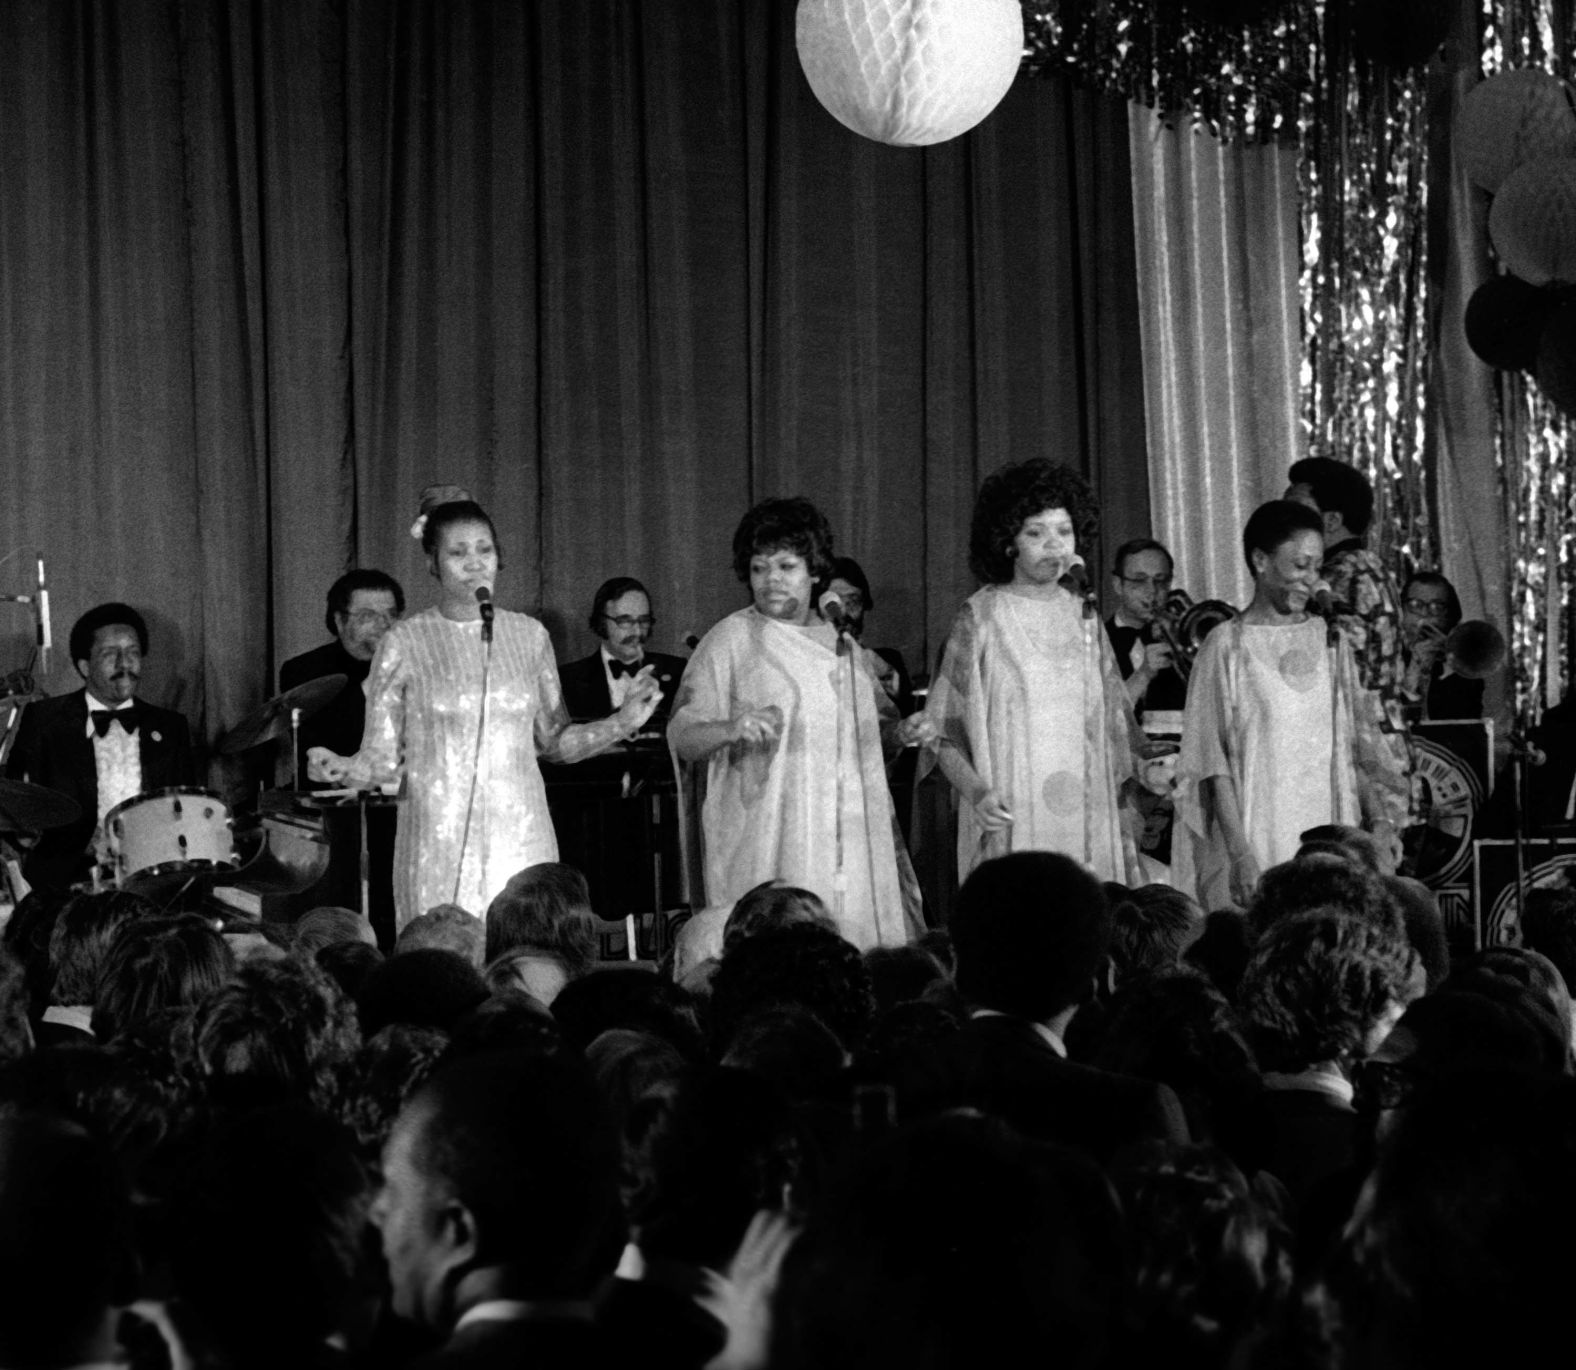 Franklin, far left, performs at Jimmy Carter's Presidential Inaugural Gala on January 20, 1977, in Washington, D.C.